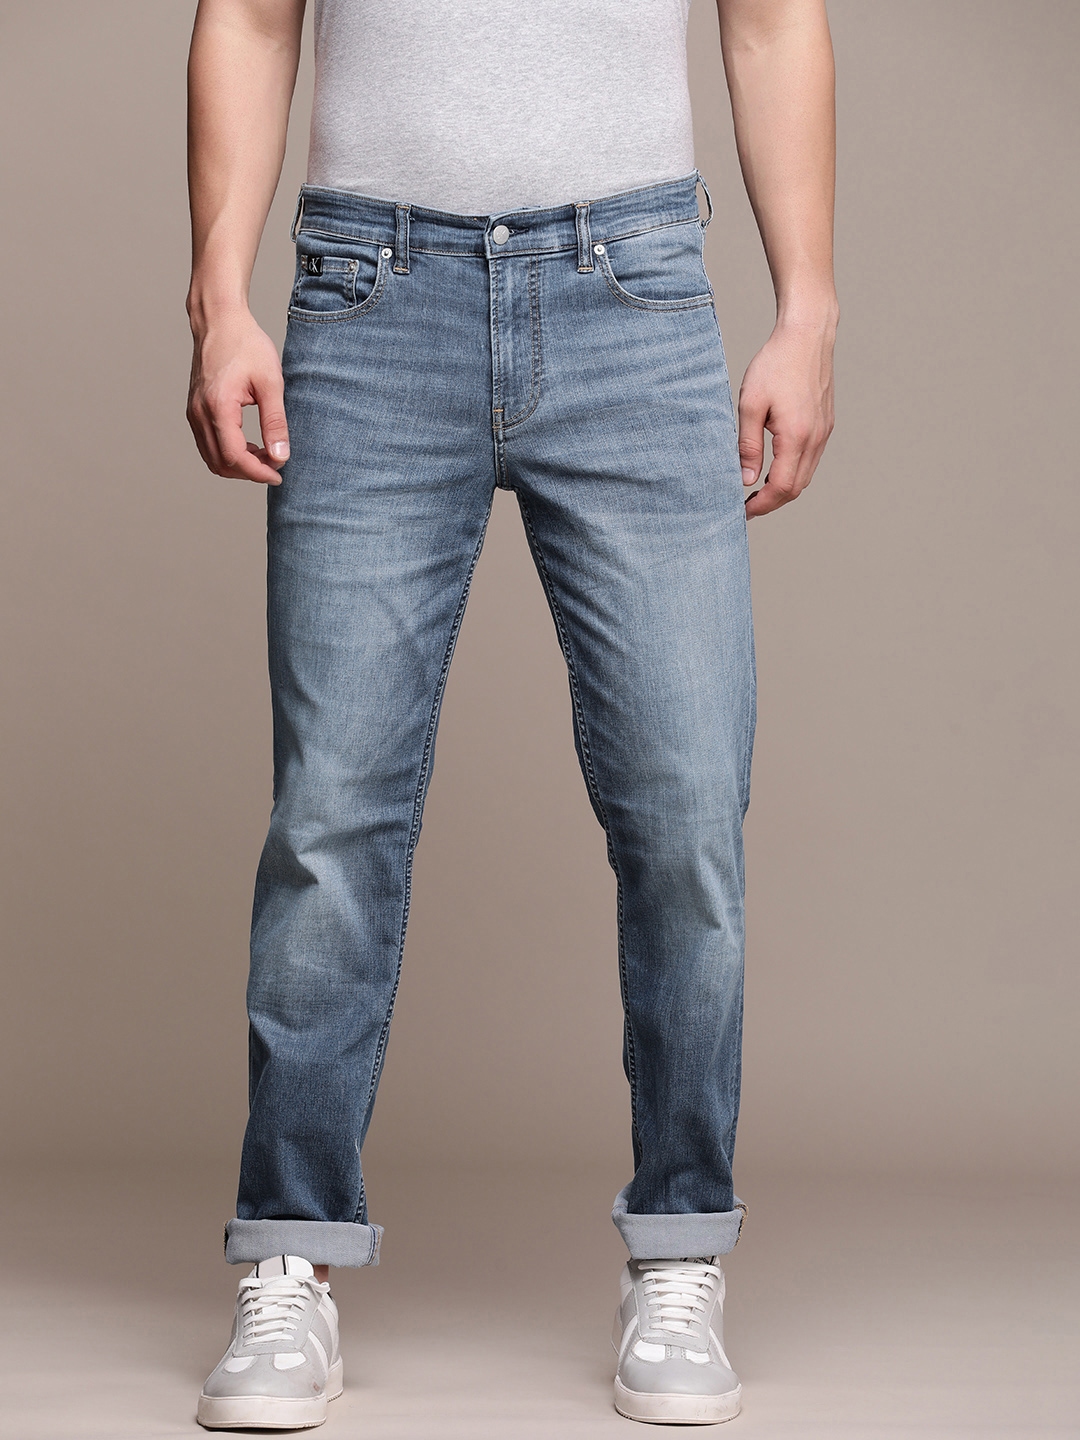 Buy Calvin Klein Jeans Skinny Fit Light Fade Mid Rise Stretchable Jeans -  Jeans for Men 21085500 | Myntra